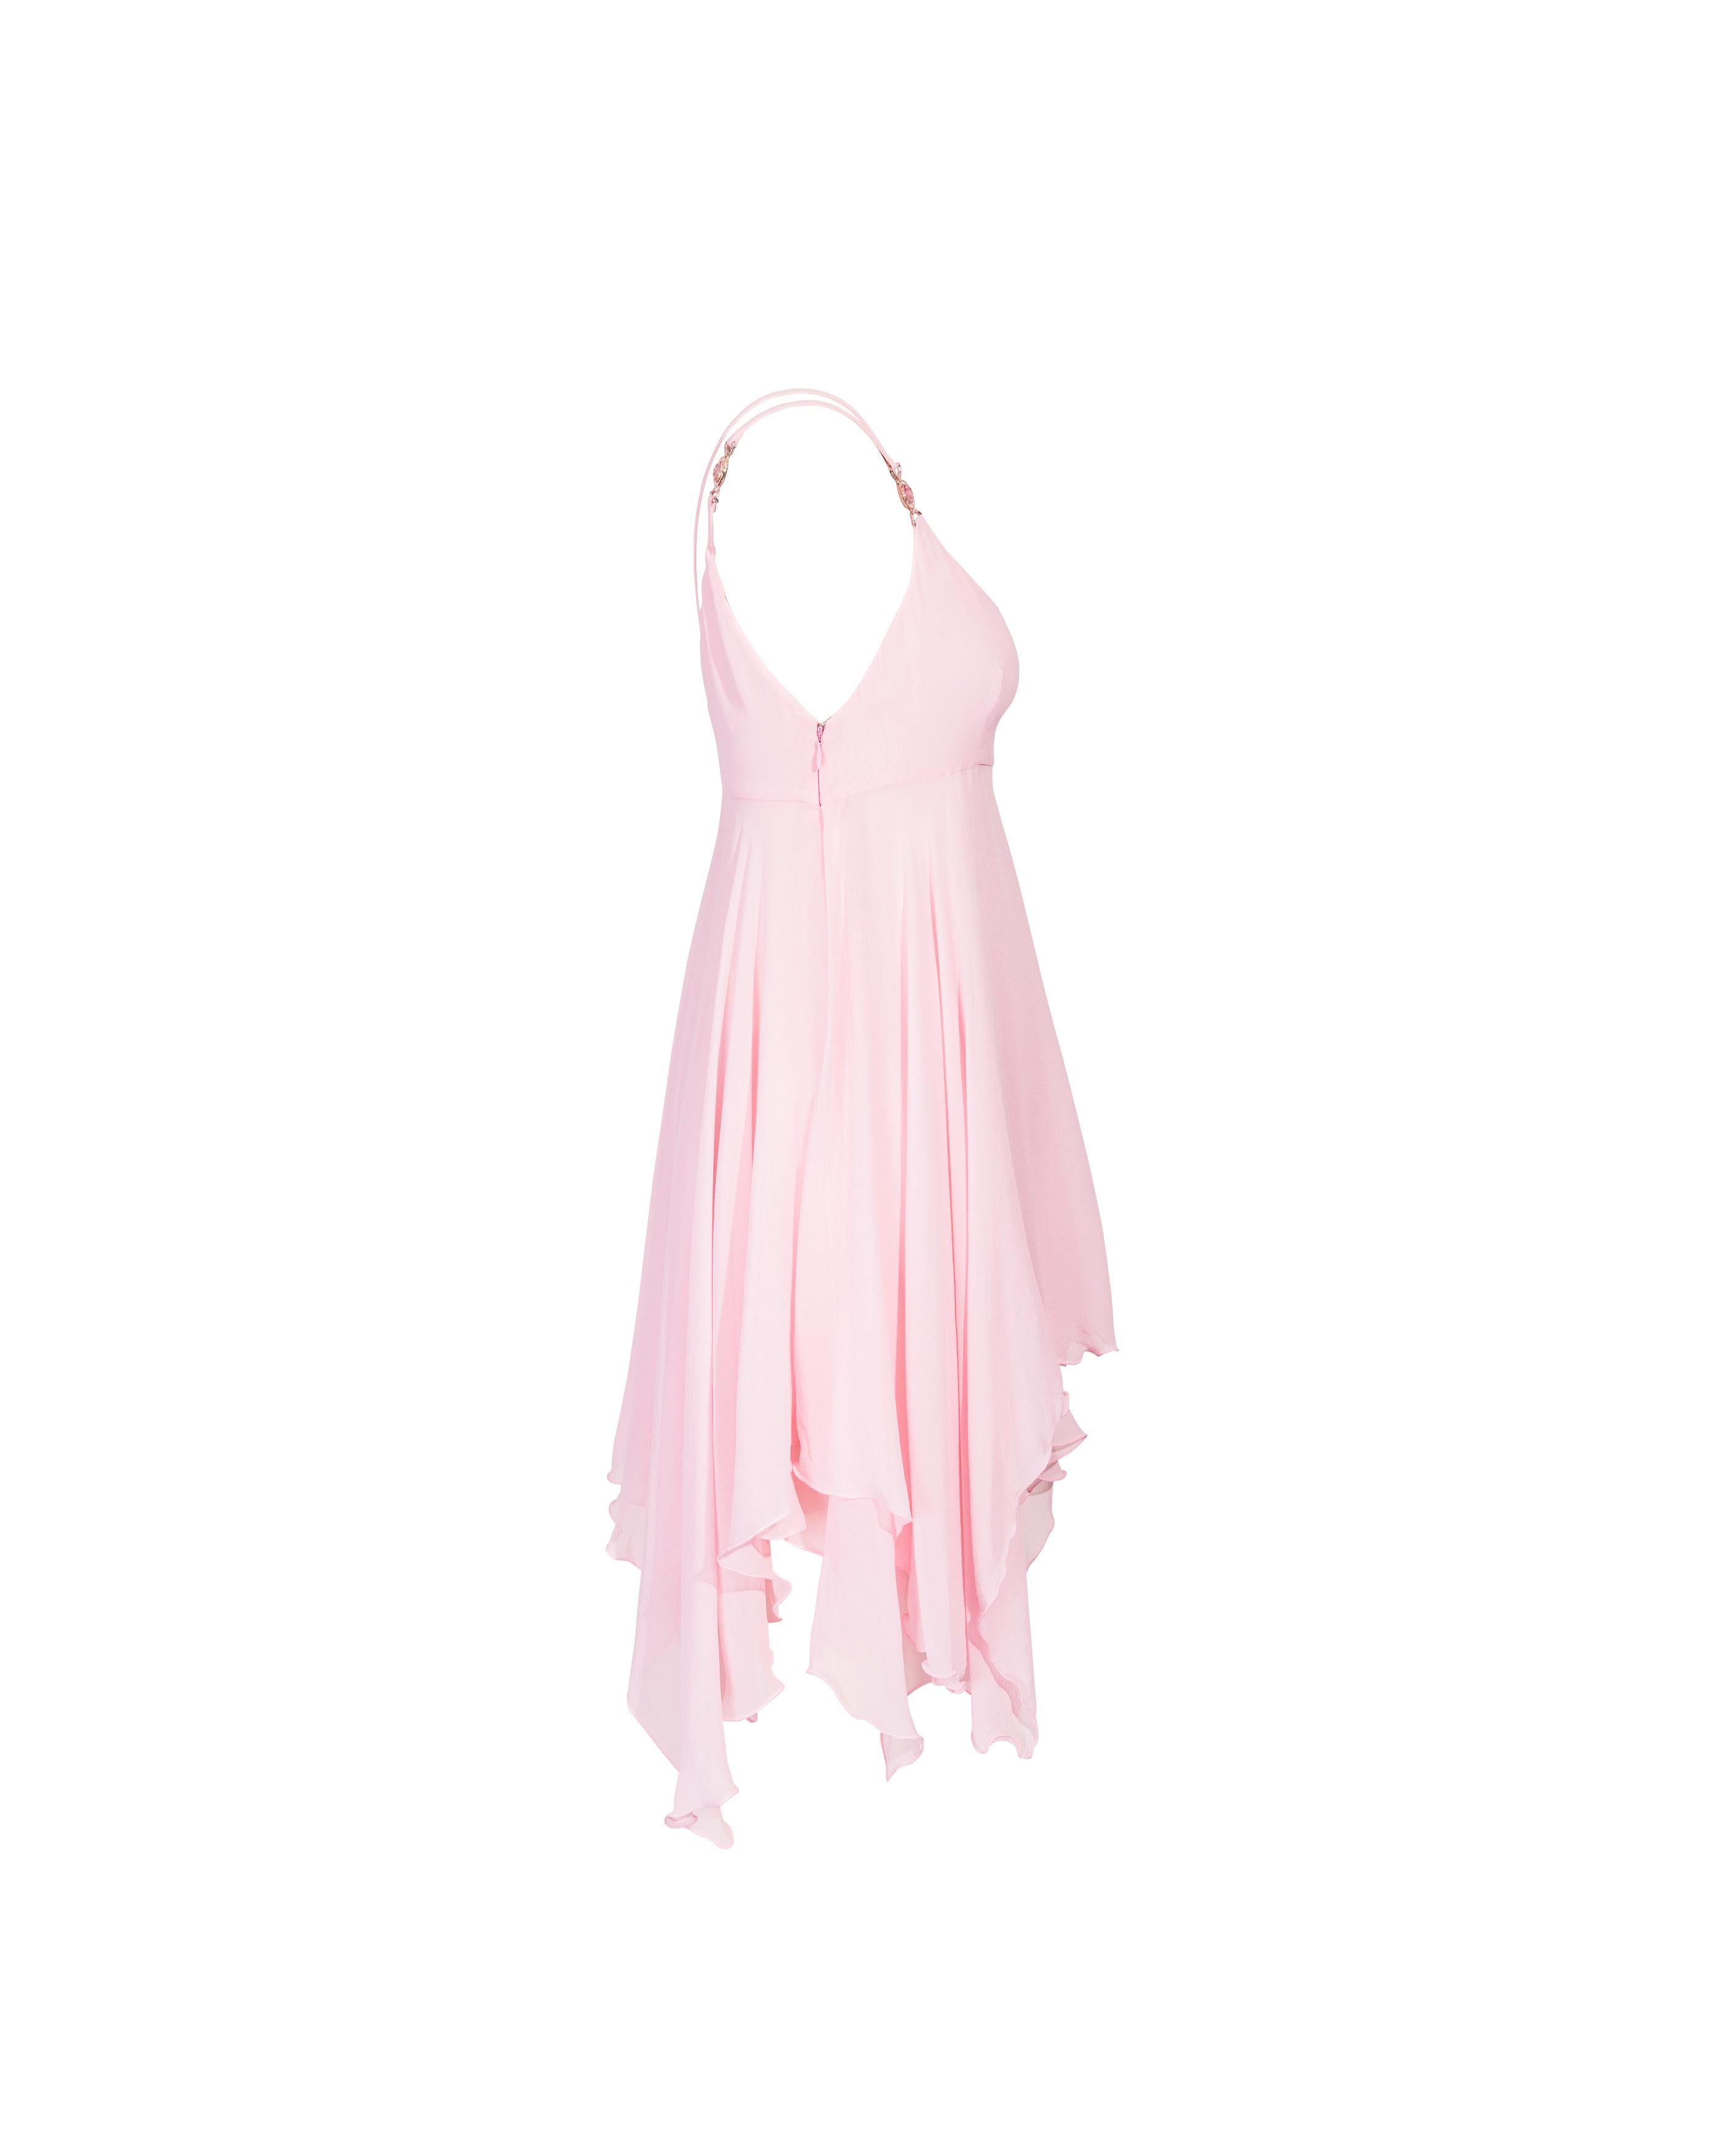 S/S 1995 Gianni Versace Pink Silk Chiffon Mini Dress In Good Condition In North Hollywood, CA